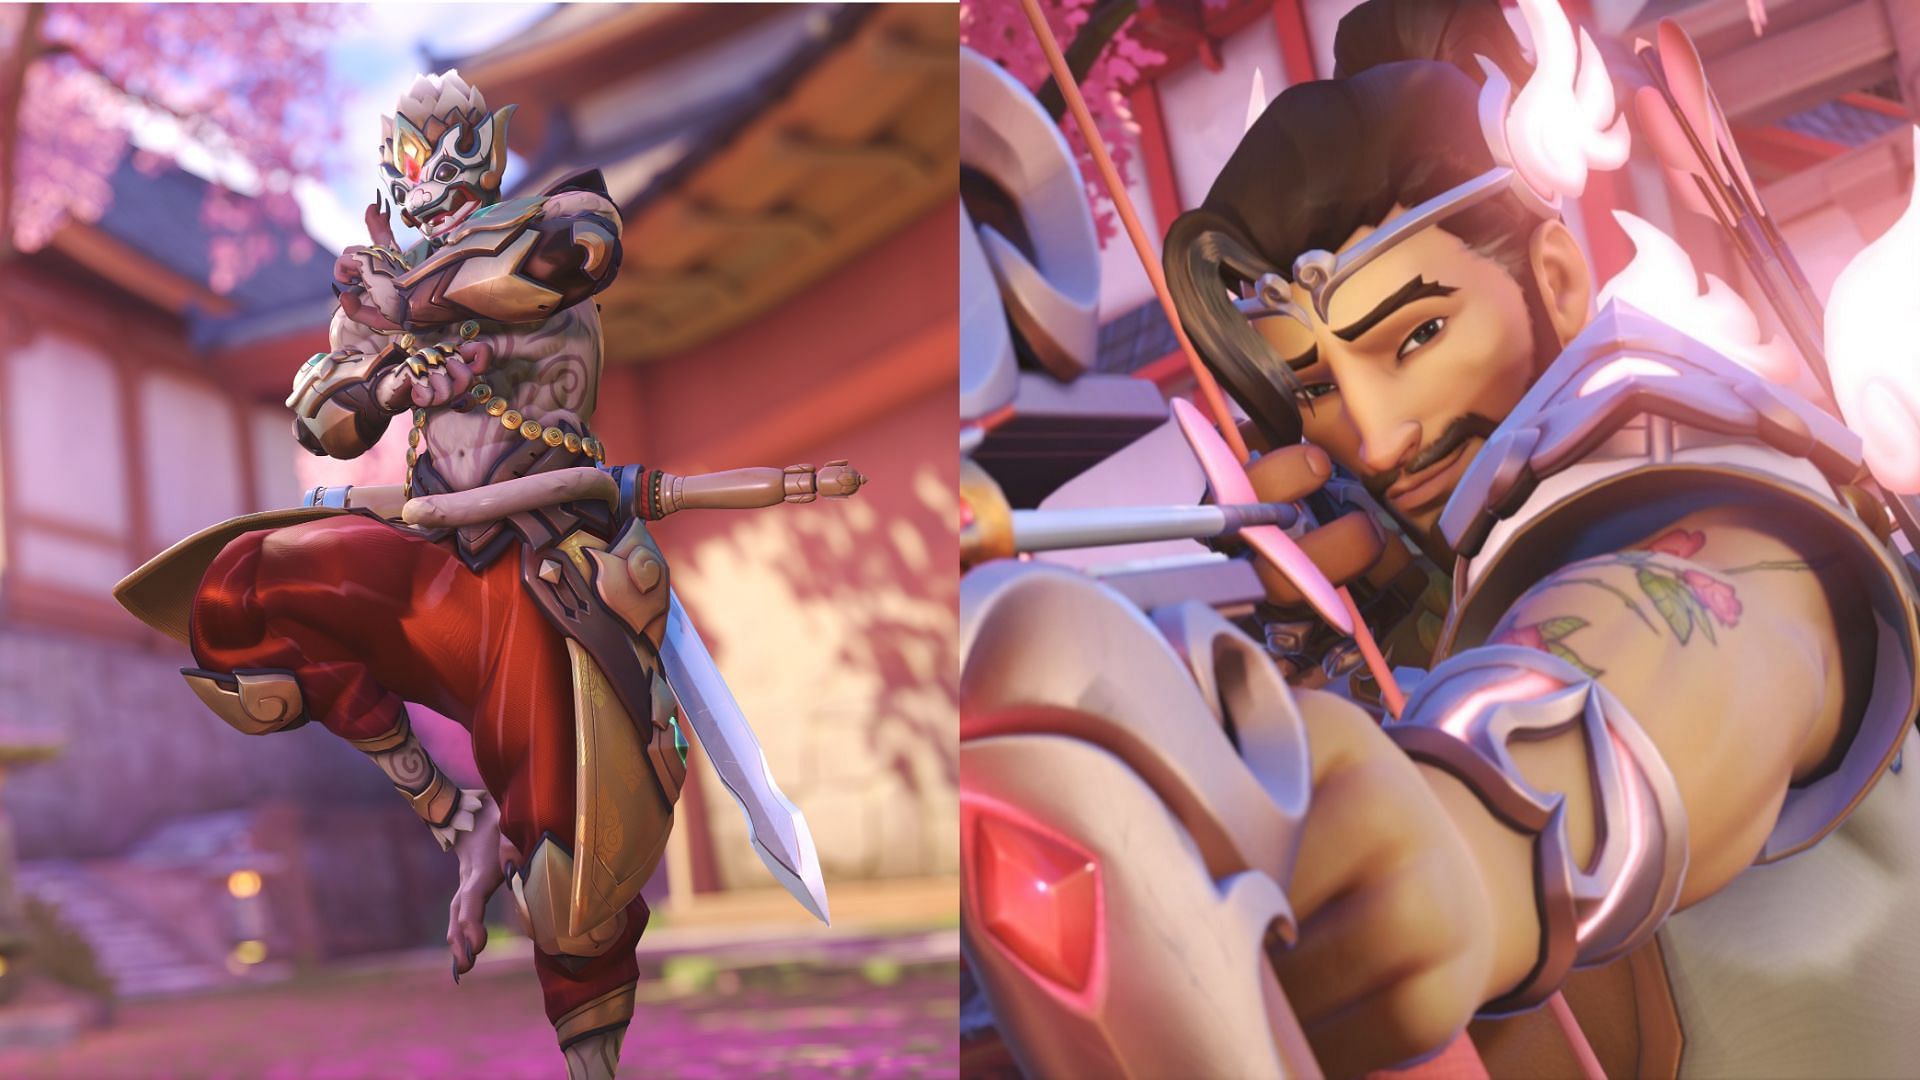 Overwatch has a pair of pricey new skins for All-Star Weekend